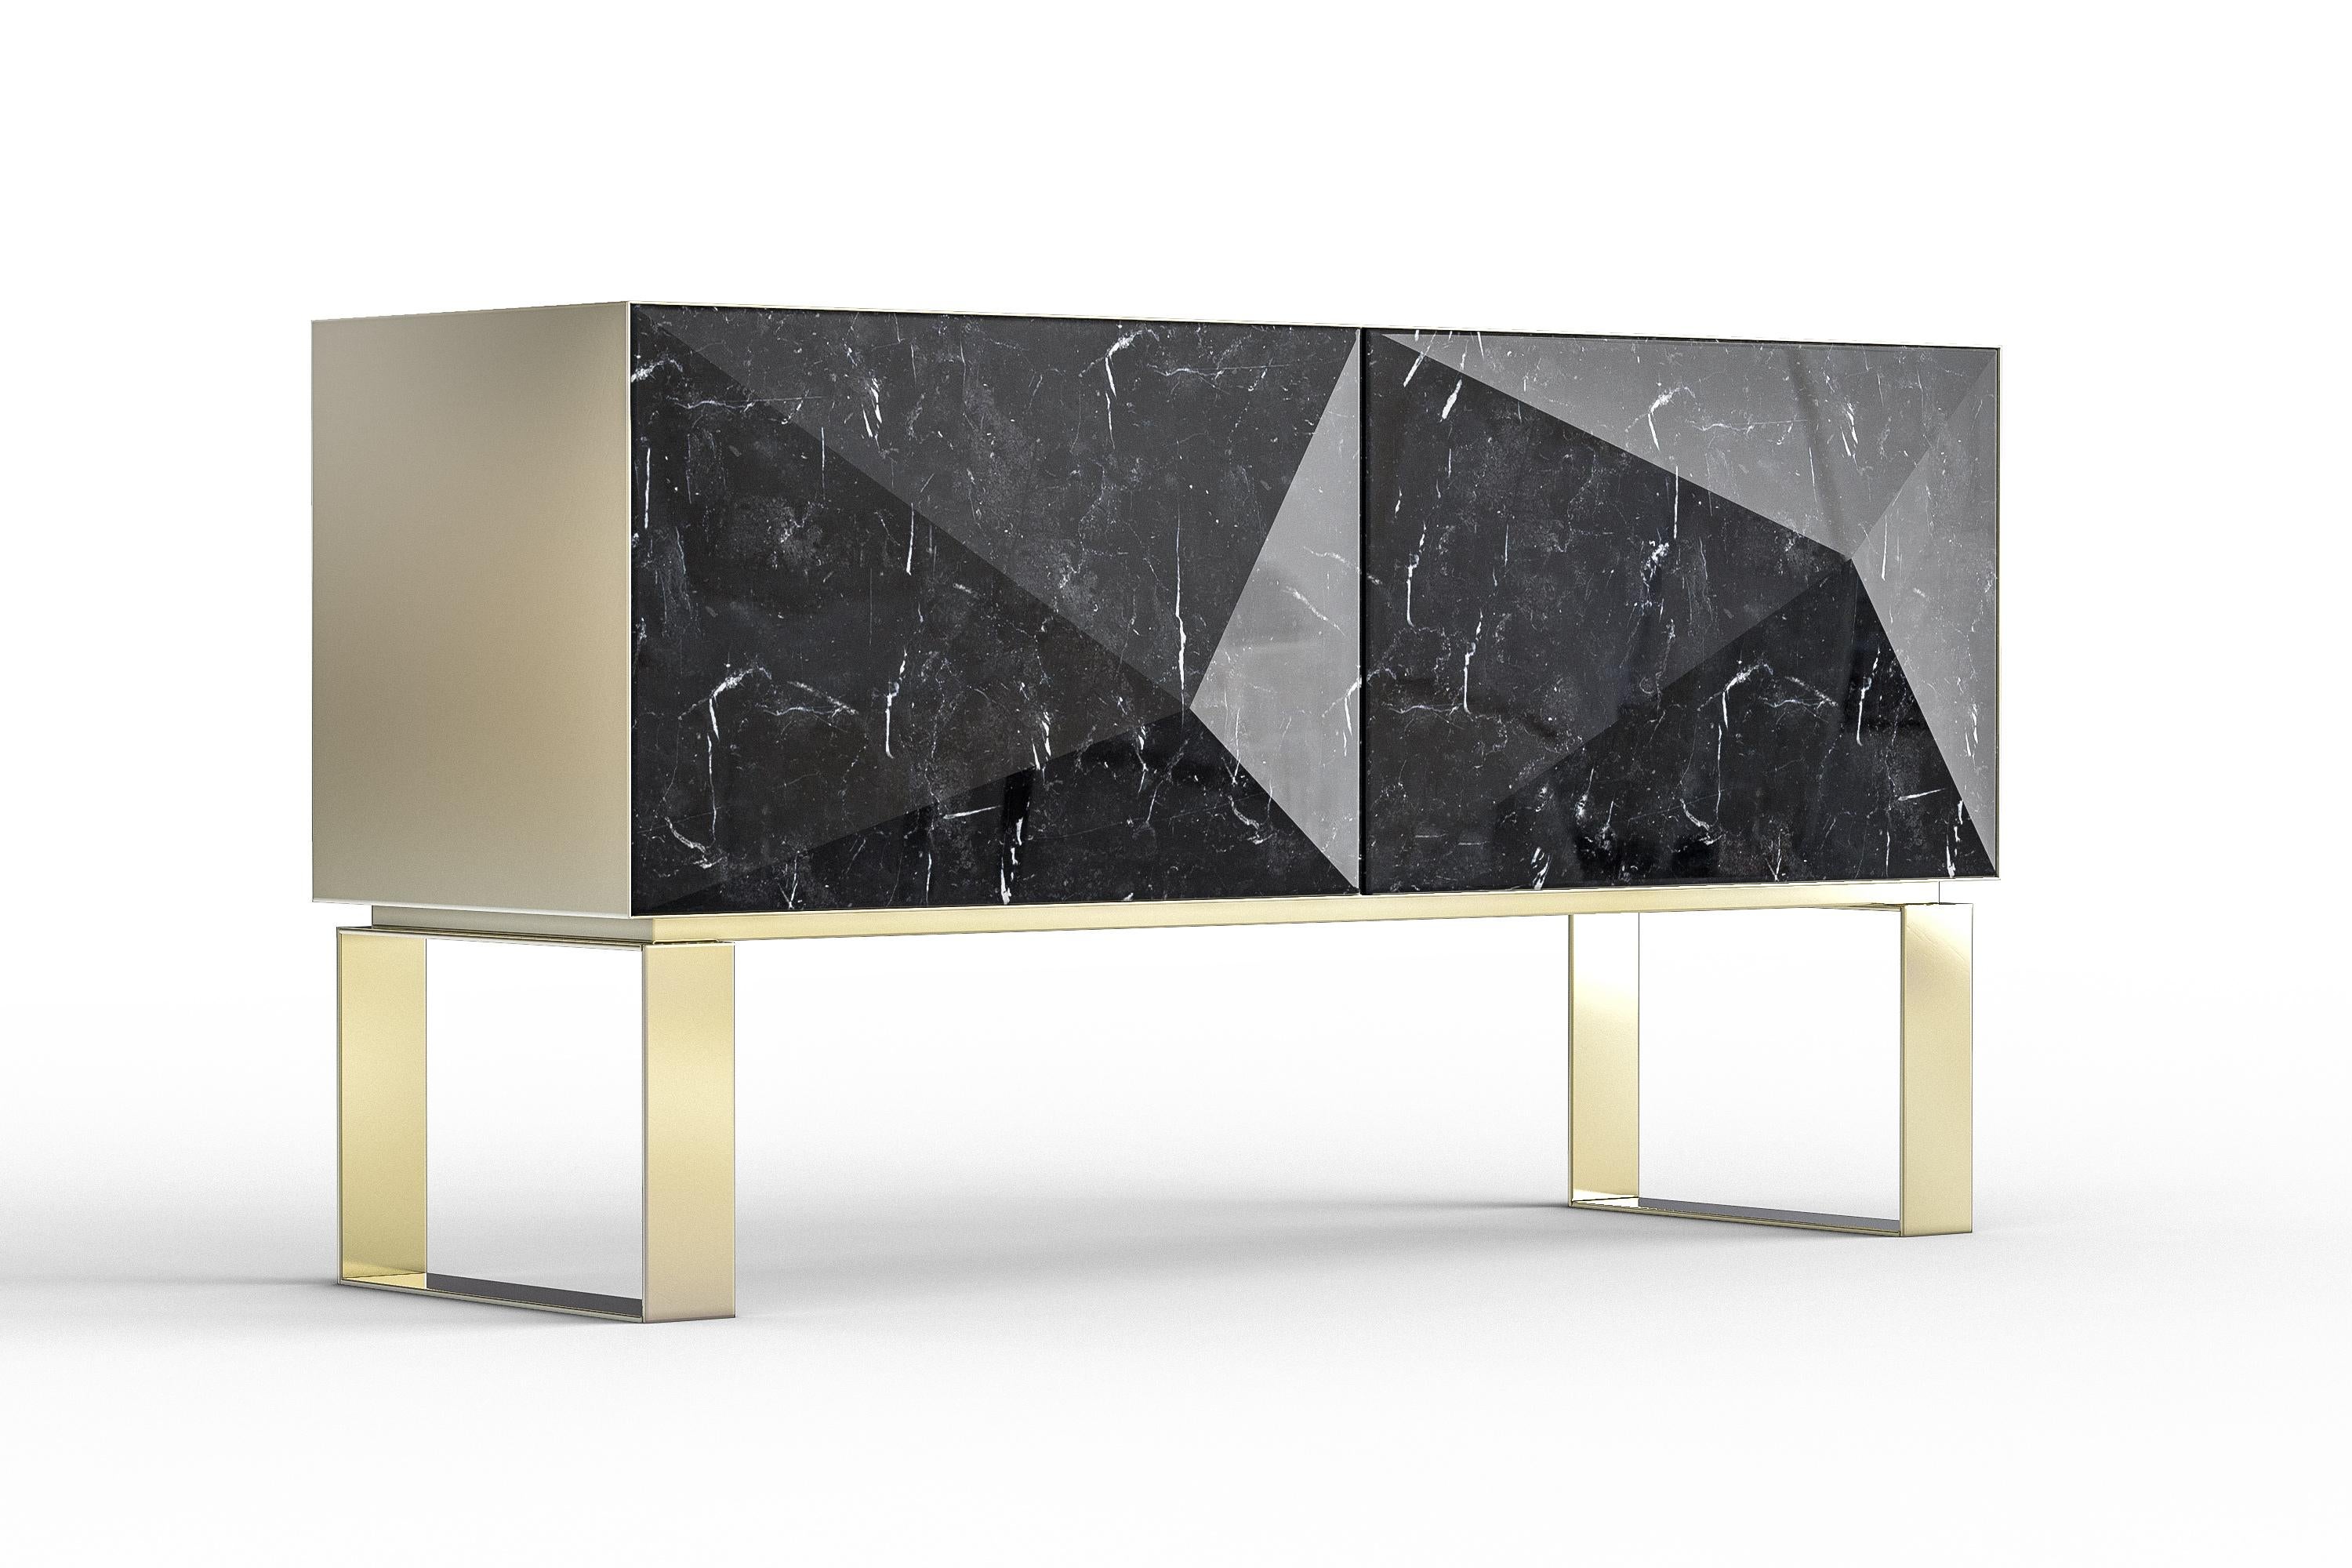 Punta cabinet by Marmi Serafini.
Materials: Marble and brass
Dimensions: 140 x 47 x 76 cm

Sharp but at the same time delicate marble cuts make the punta cabinet a refined and elegant piece of furniture that is embellished with a frame and a